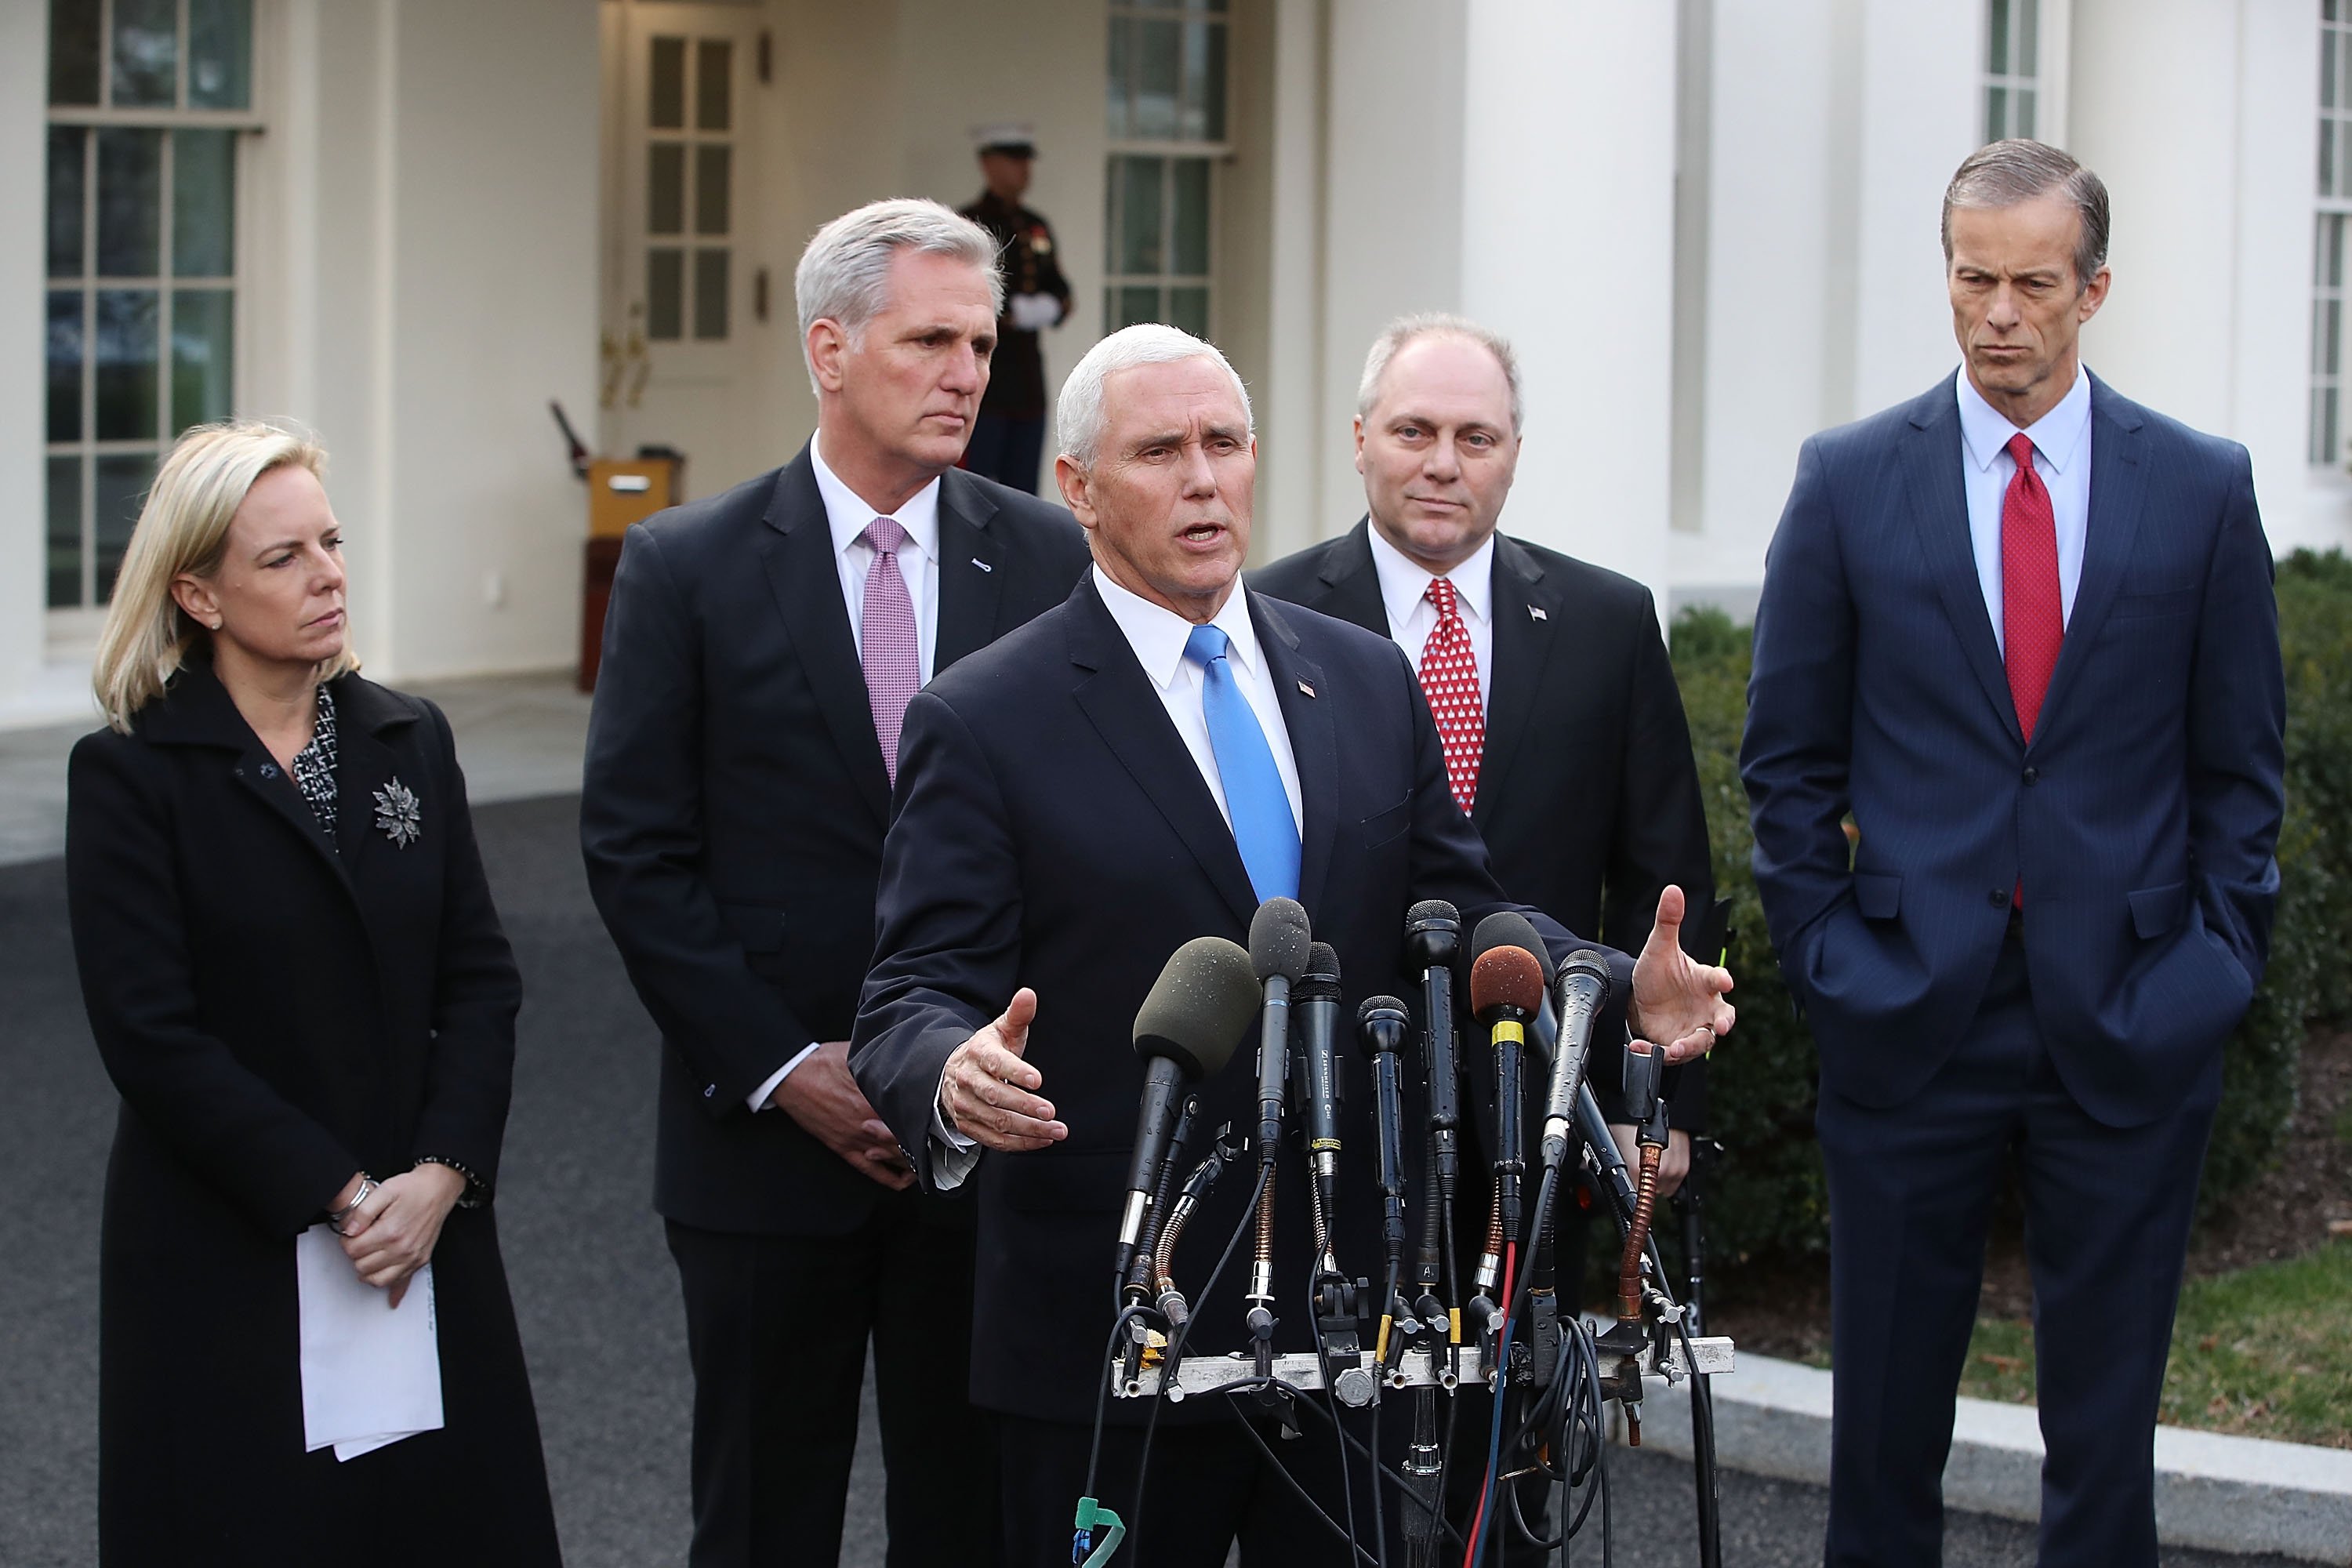 U.S. Vice President Mike Pence speaks to the media after a meeting with President Trump and Congressional leaders at the White House on January 9, 2019 in Washington, DC. (Photo by Mark Wilson/Getty Images)